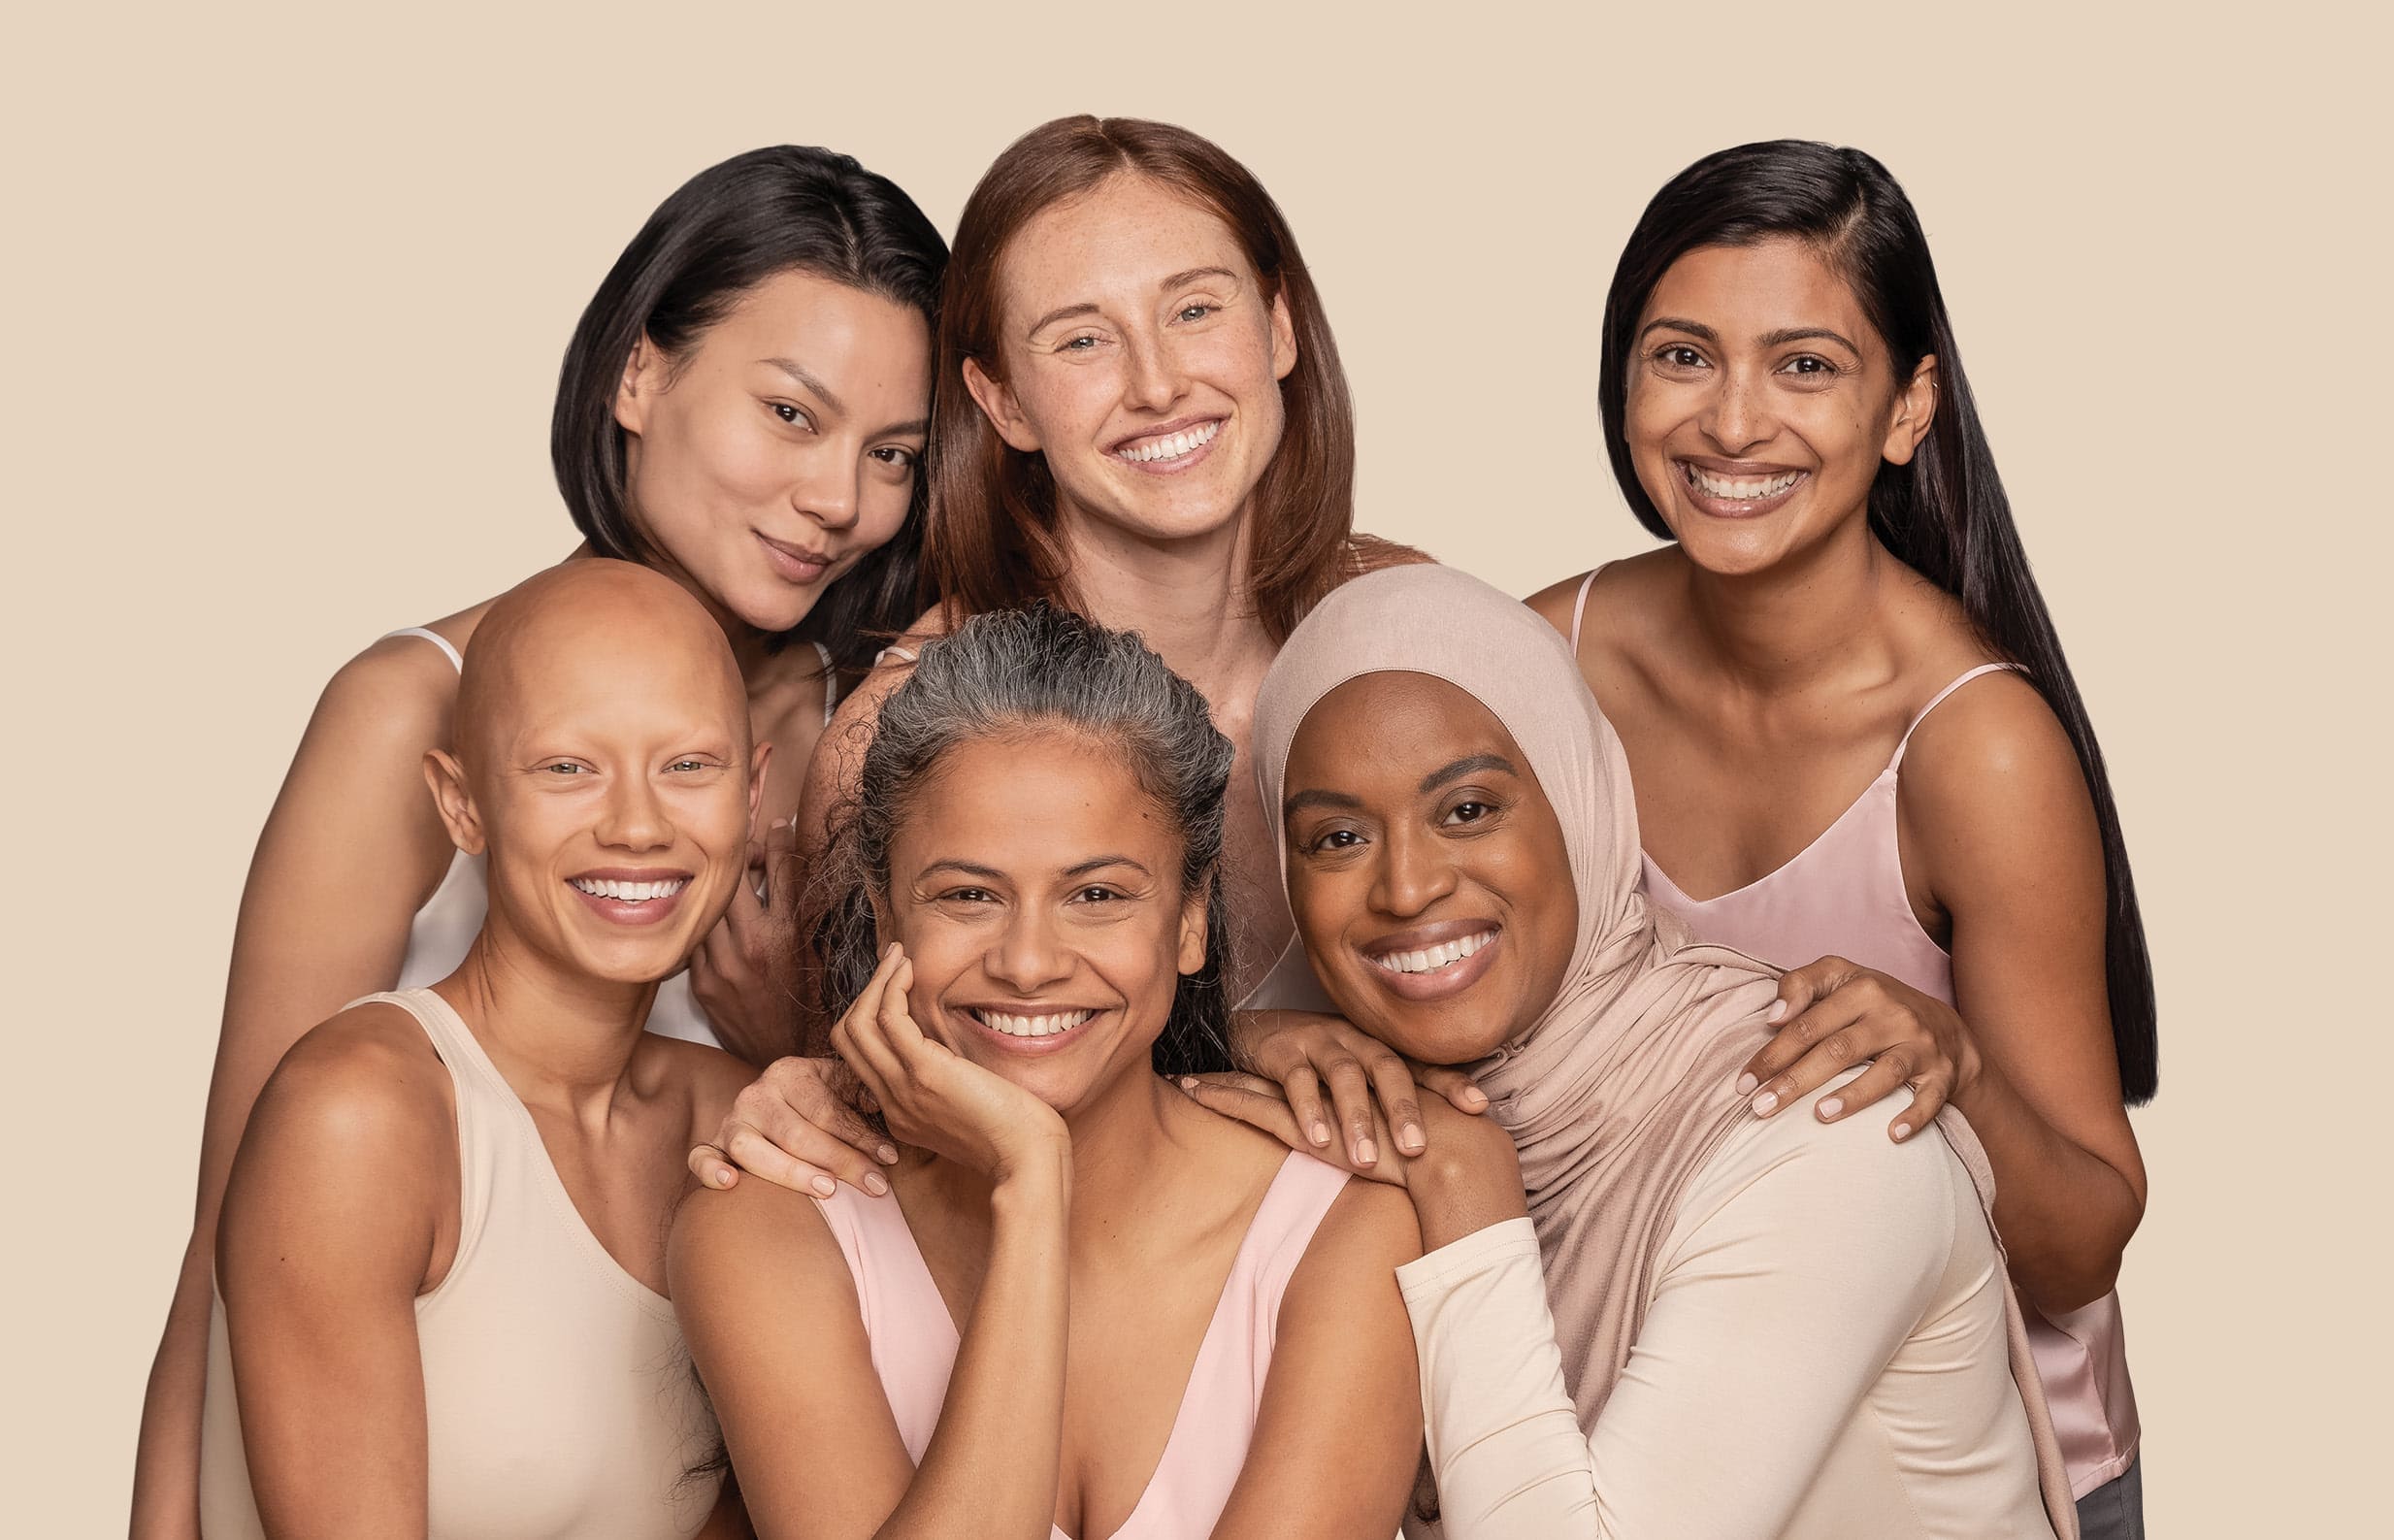 Three women from different ethnicities sitting and three other women standing behind them and smiling